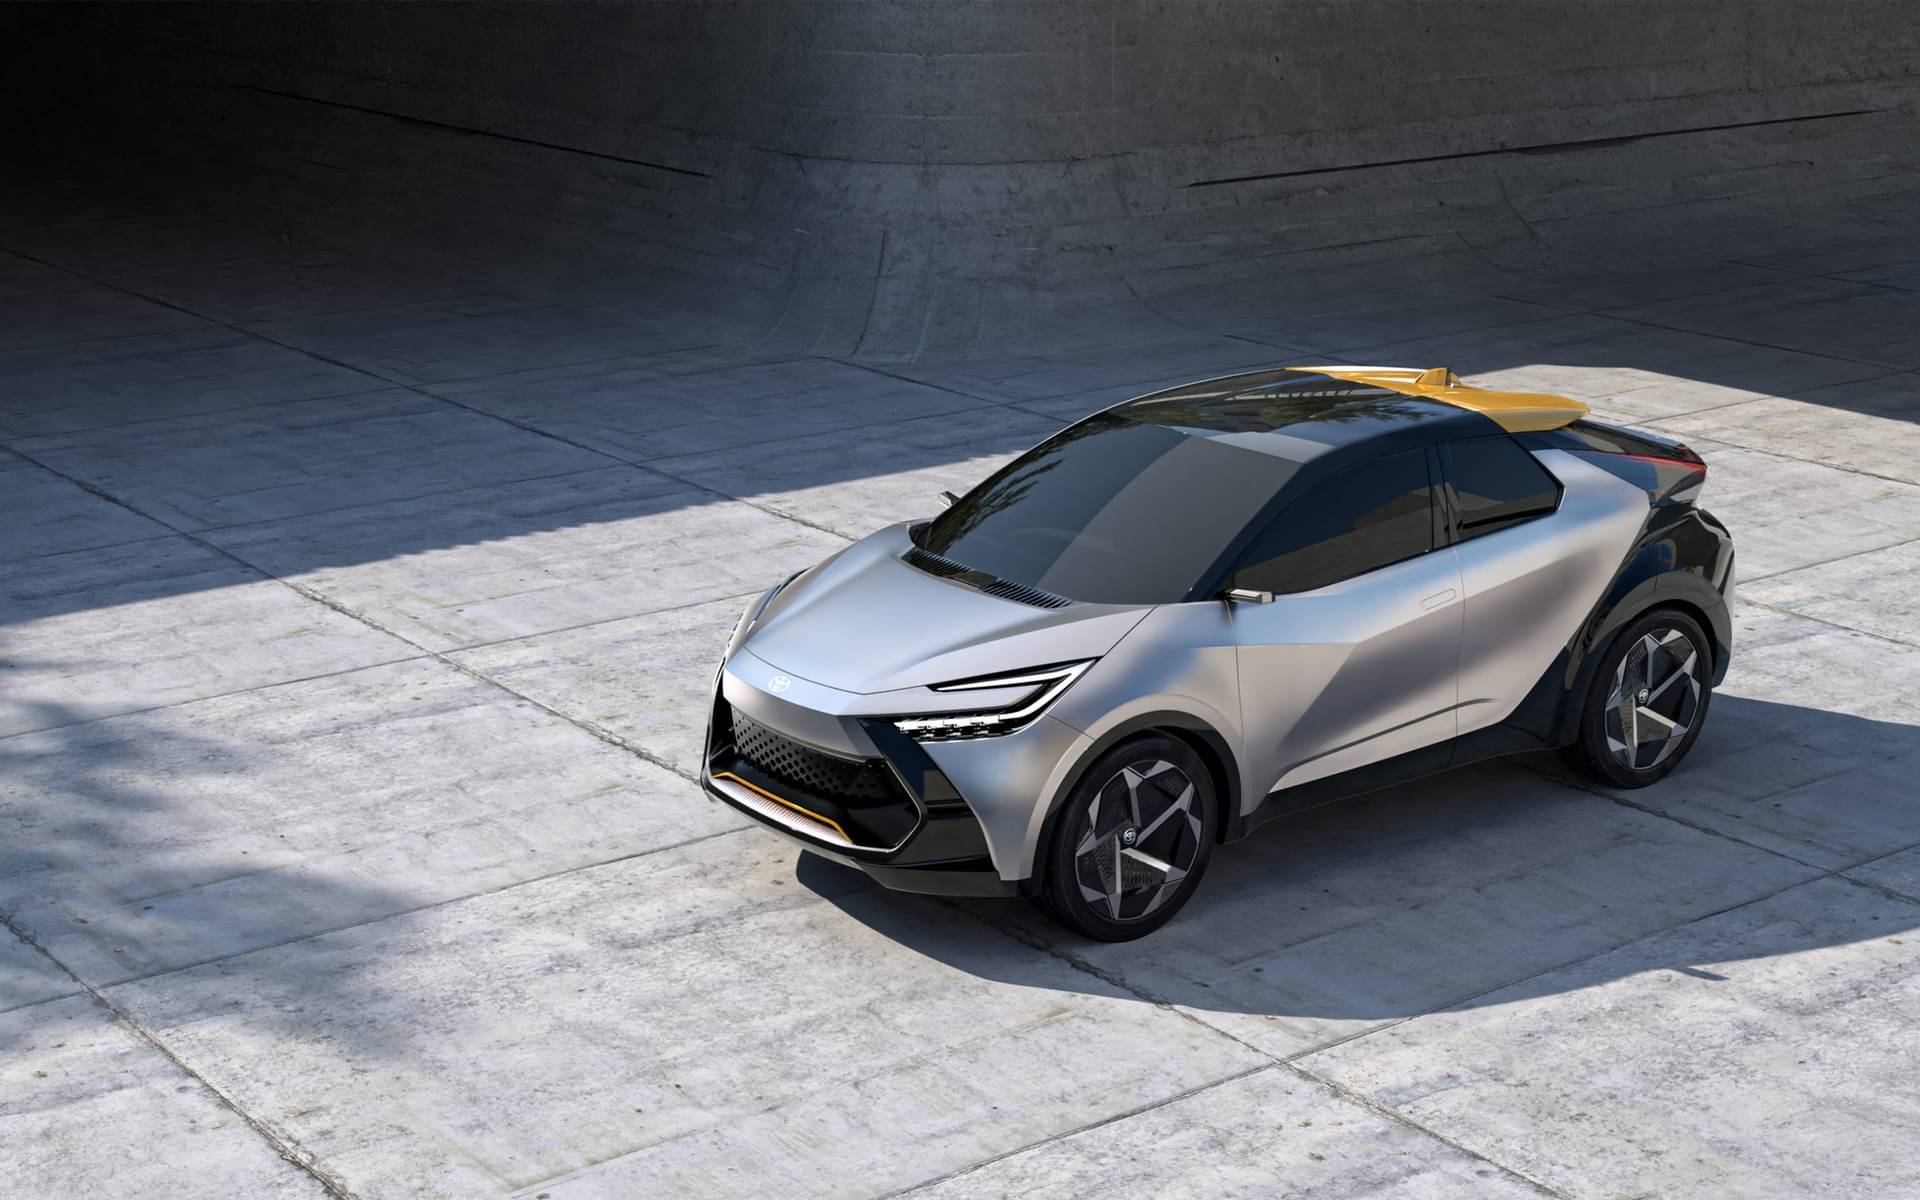 Going hybrid with the Toyota C-HR #AD - Dad Blog UK